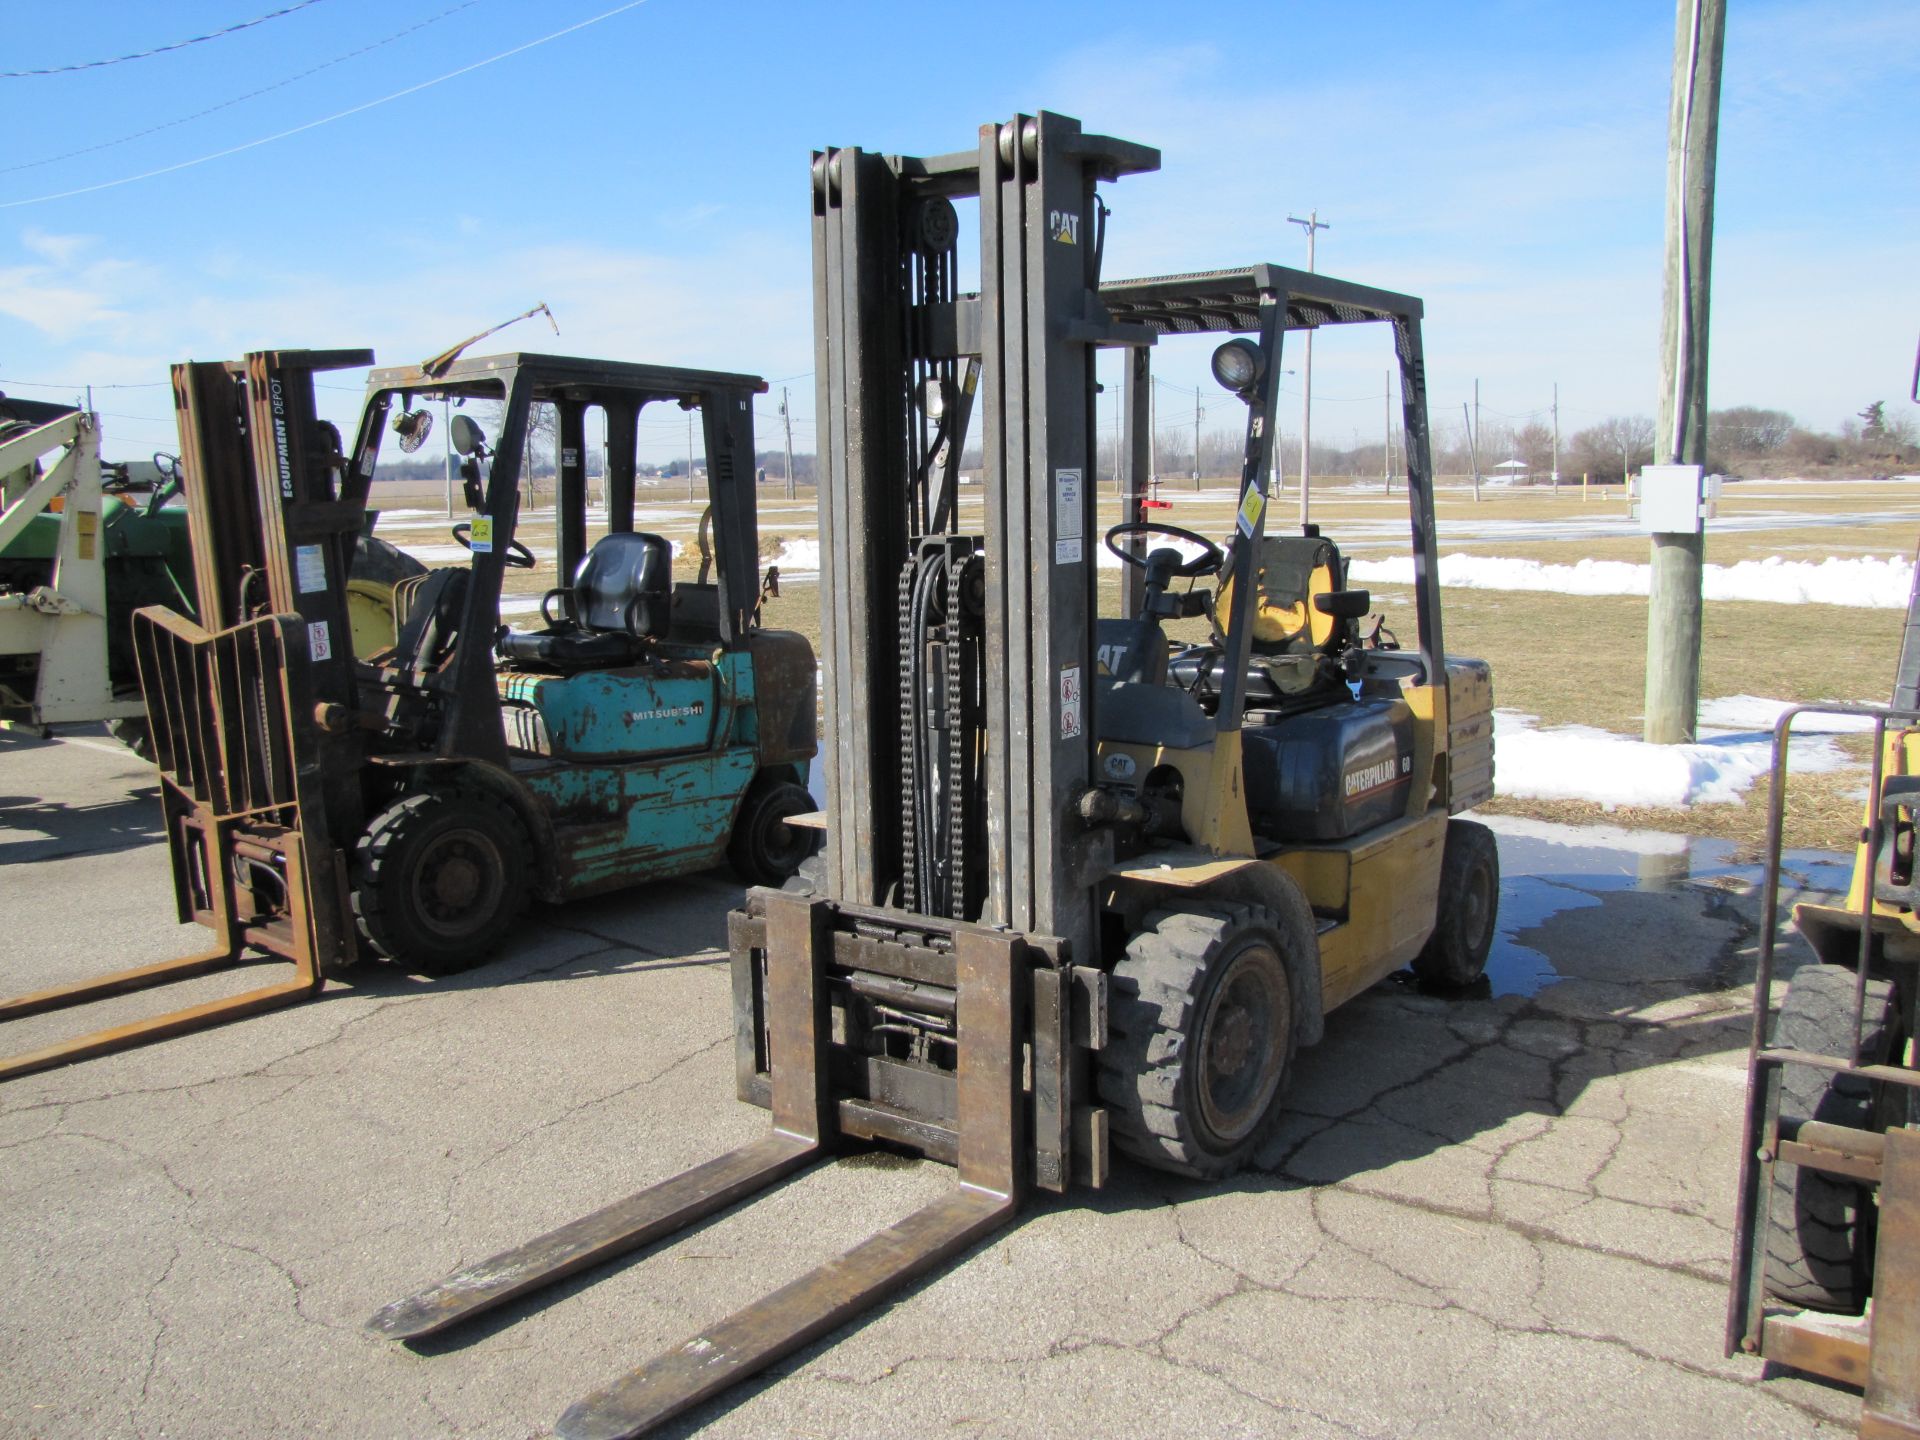 Caterpillar 60 forklift, 4500 lb capacity, propane, 3-stage, side shift, 28x9/15 fronts